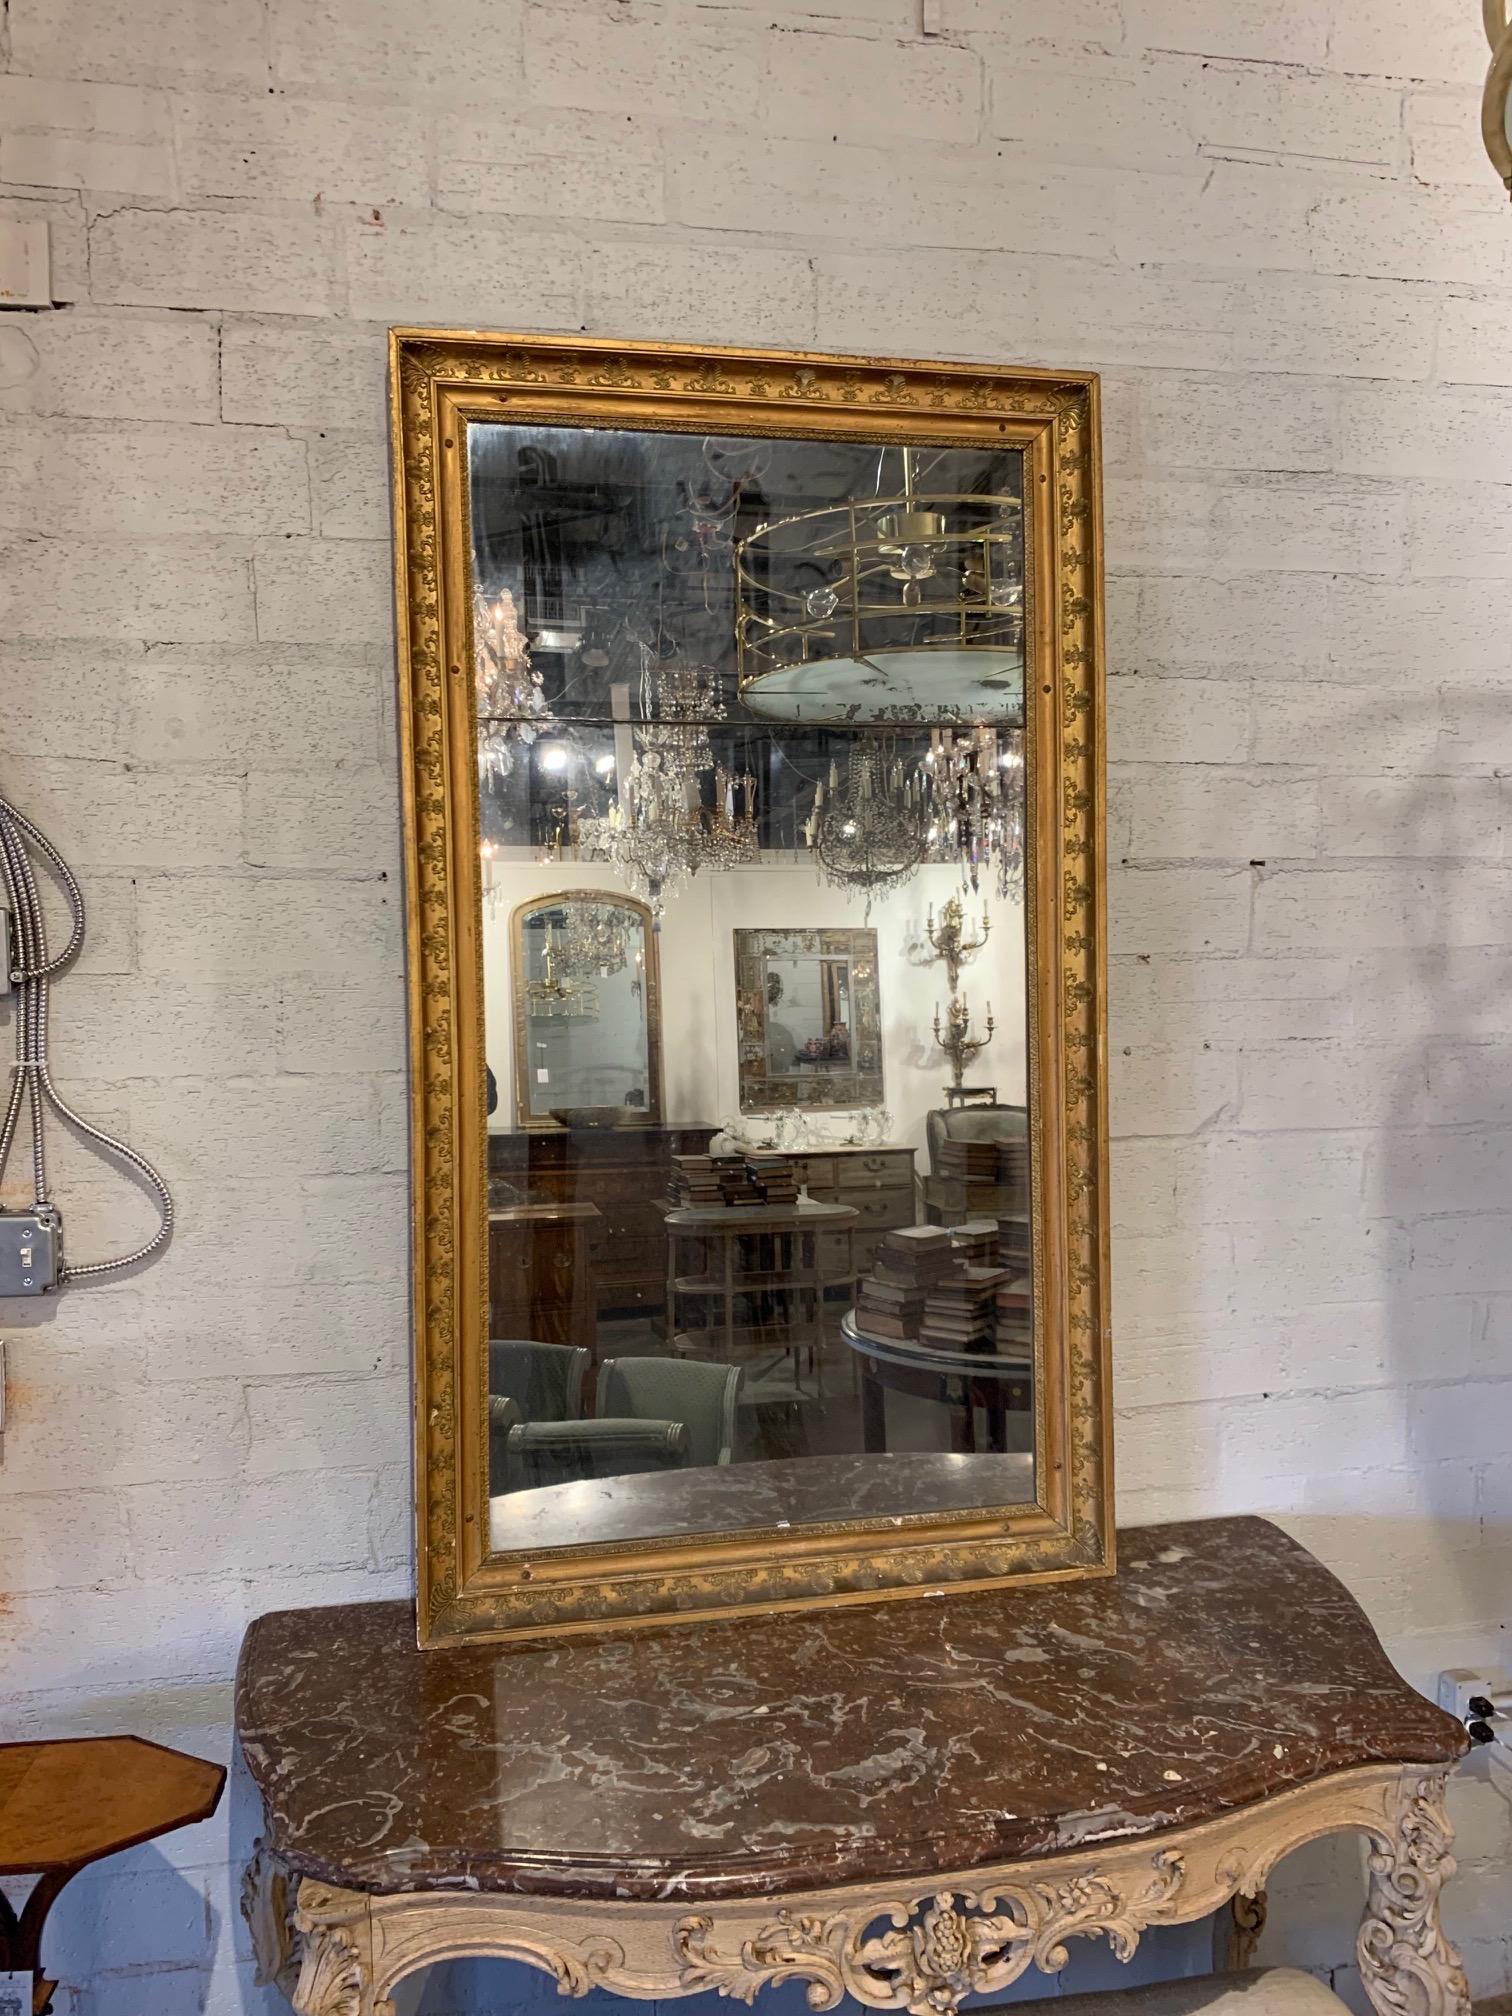 Elegant 19th century French Napoleon III giltwood mirror with original divided mercury glass. Beautiful decorative design on the giltwood. So pretty!